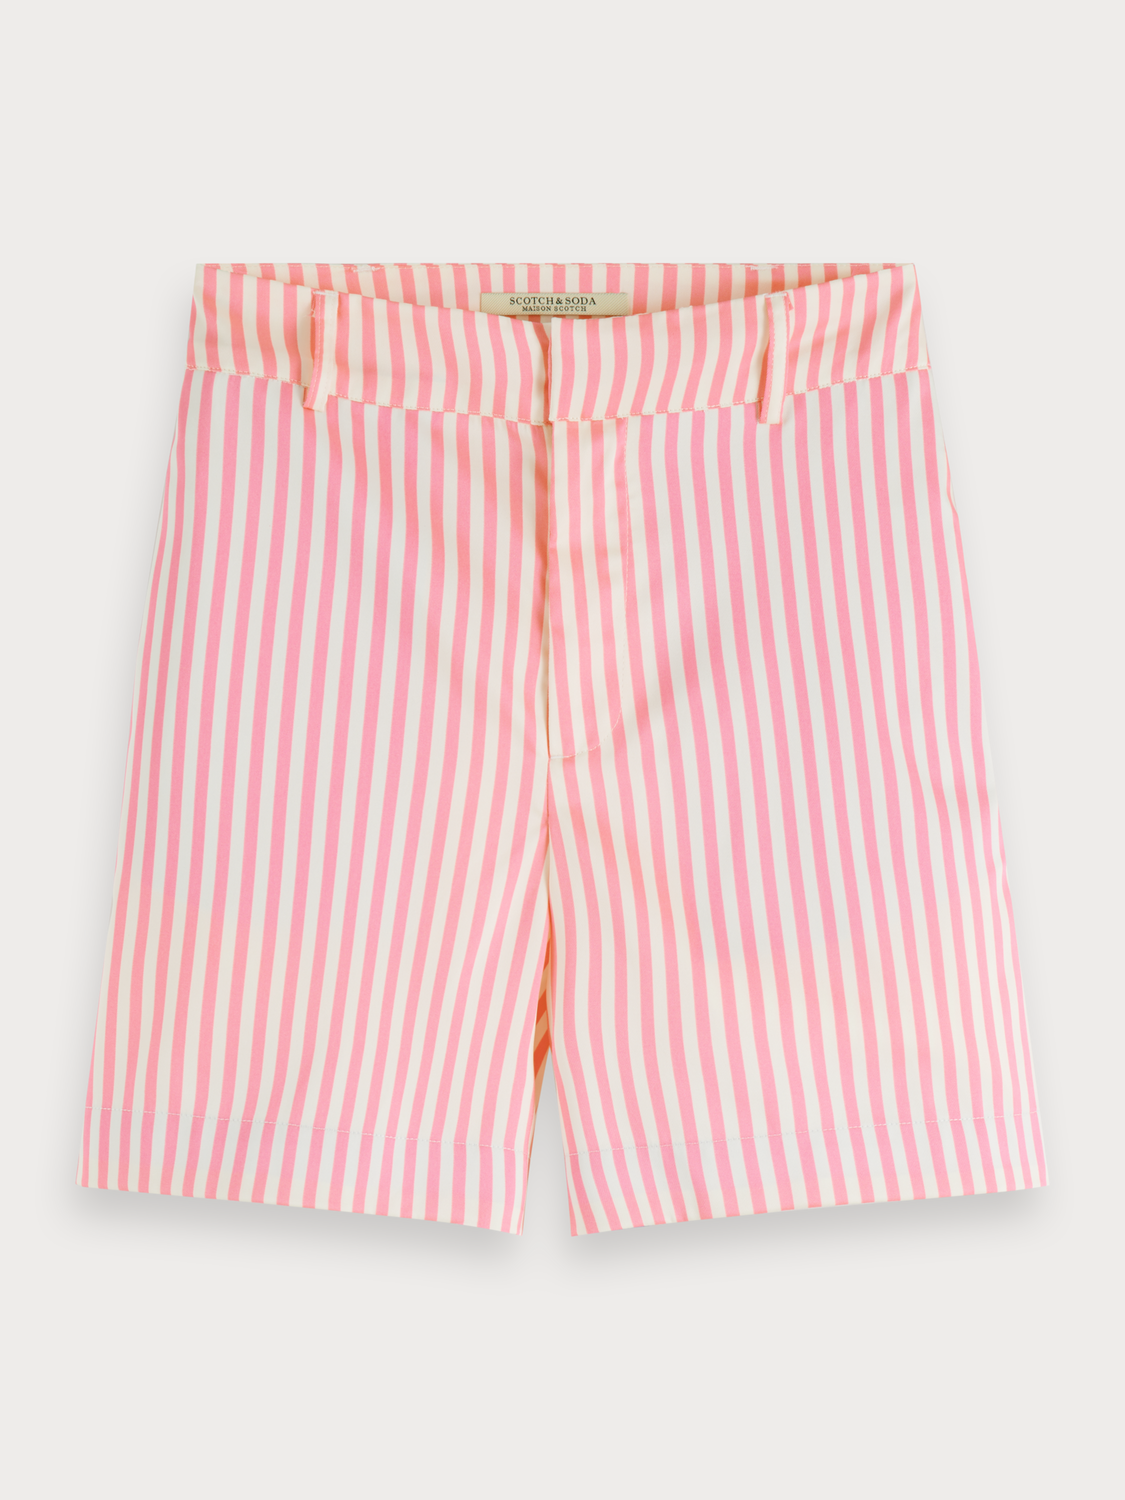 Scotch and Soda W | Pink Striped Shorts in Combo S | Scotch Select